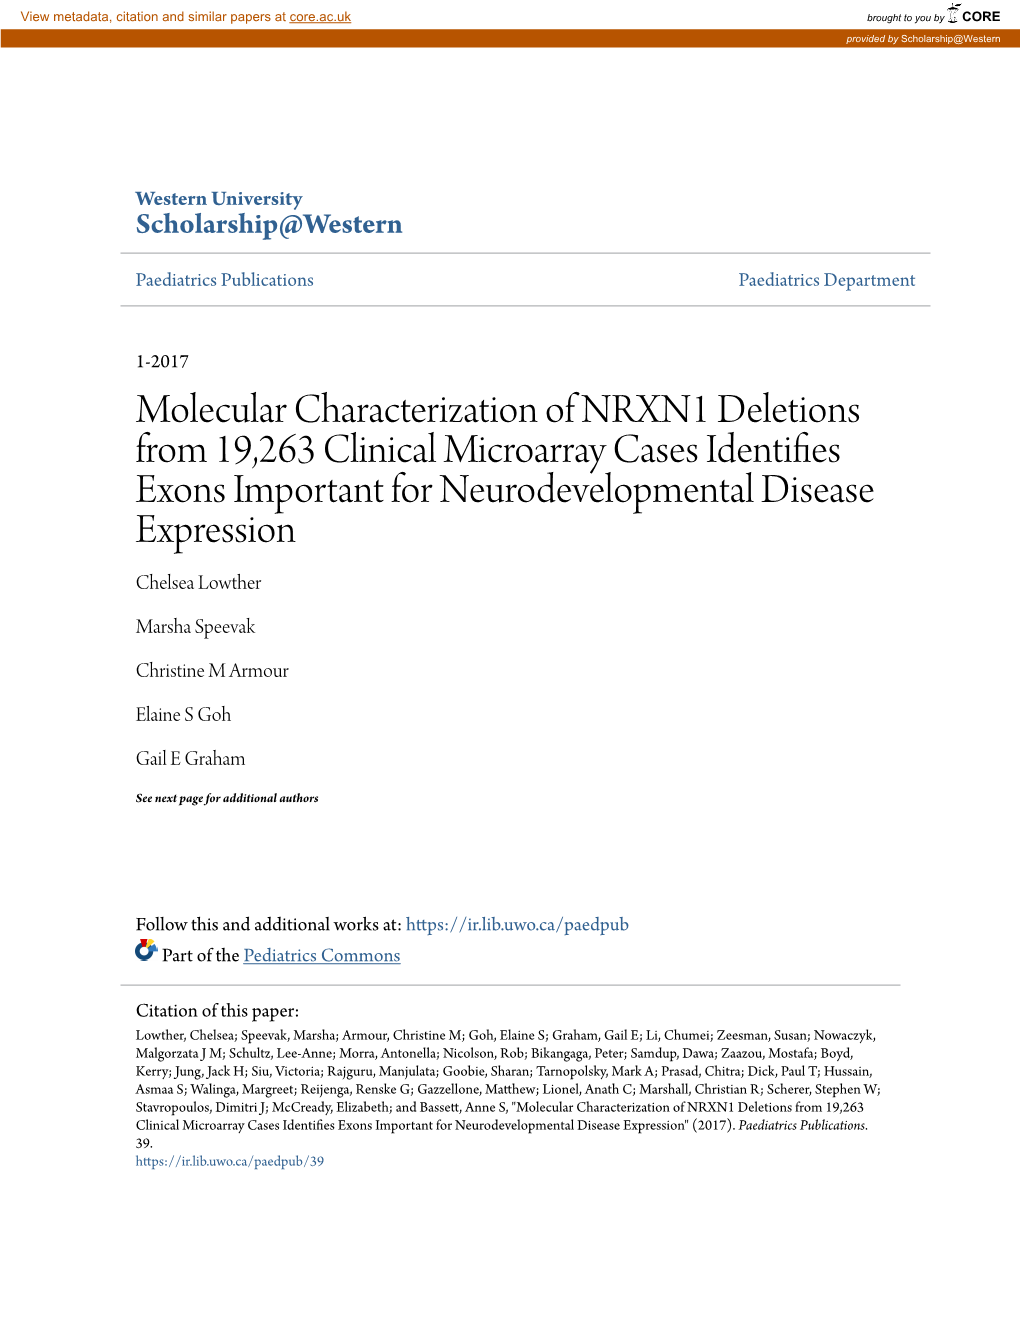 Molecular Characterization of NRXN1 Deletions from 19,263 Clinical